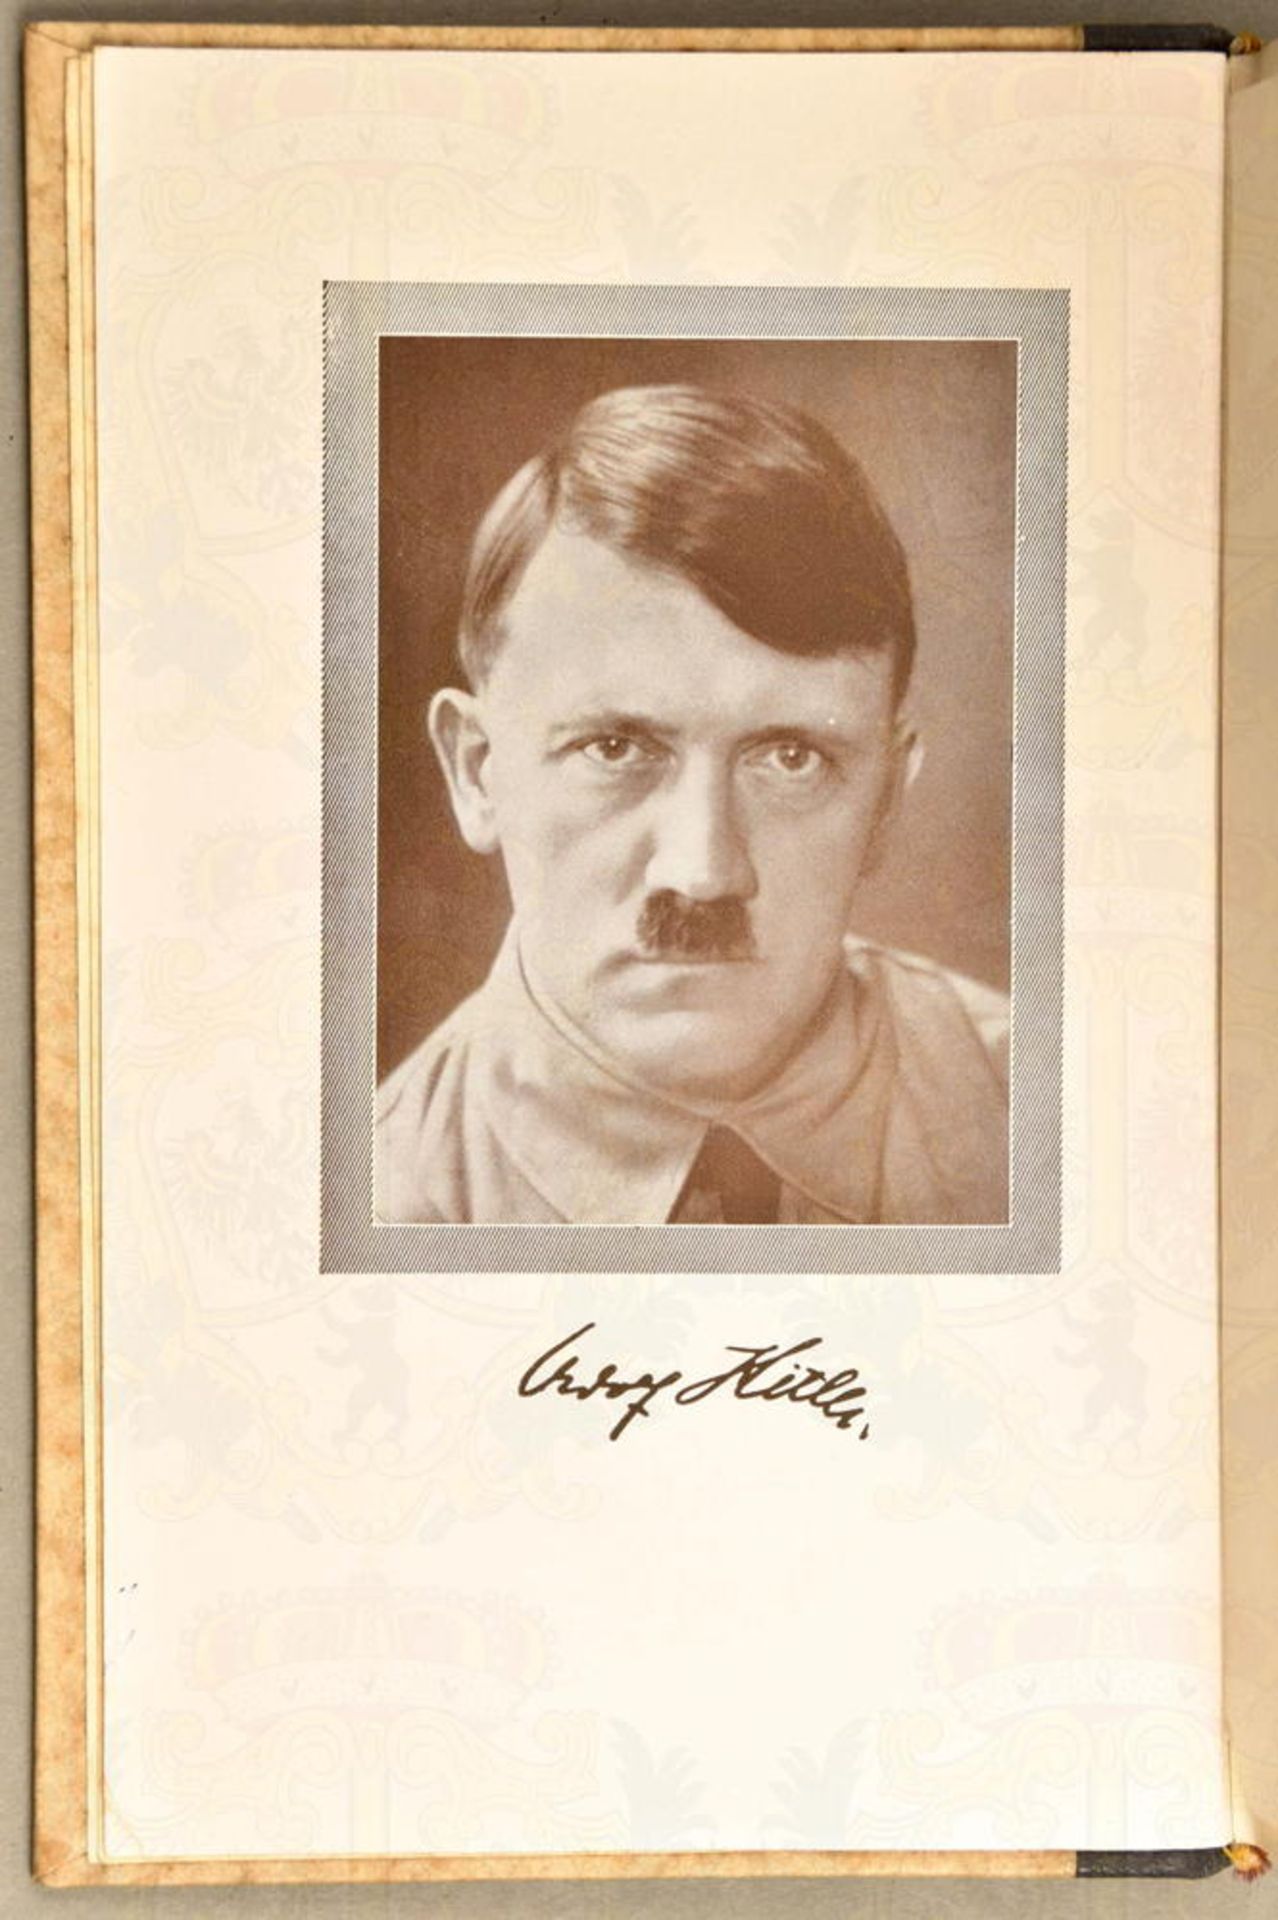 Mein Kampf - Image 5 of 5